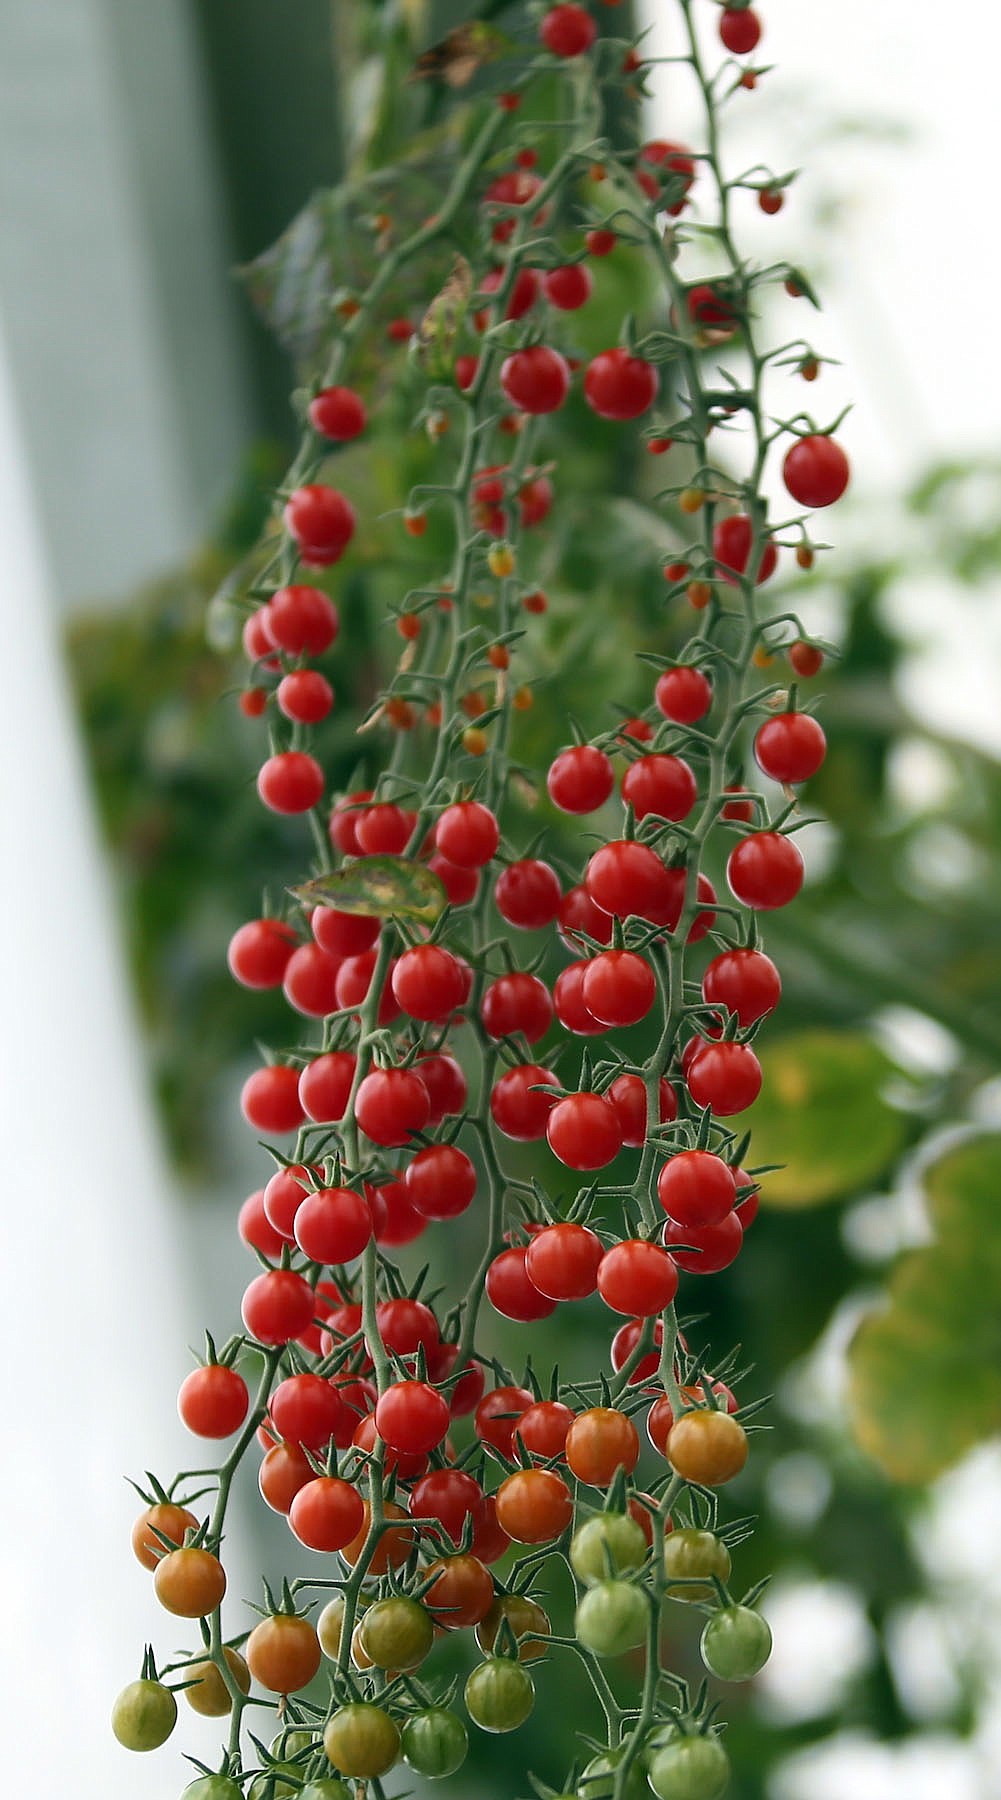 Currant tomatoes hang aloft in the Deerfield Farms greenhouse in Sagle. (JUDD WILSON/Press)